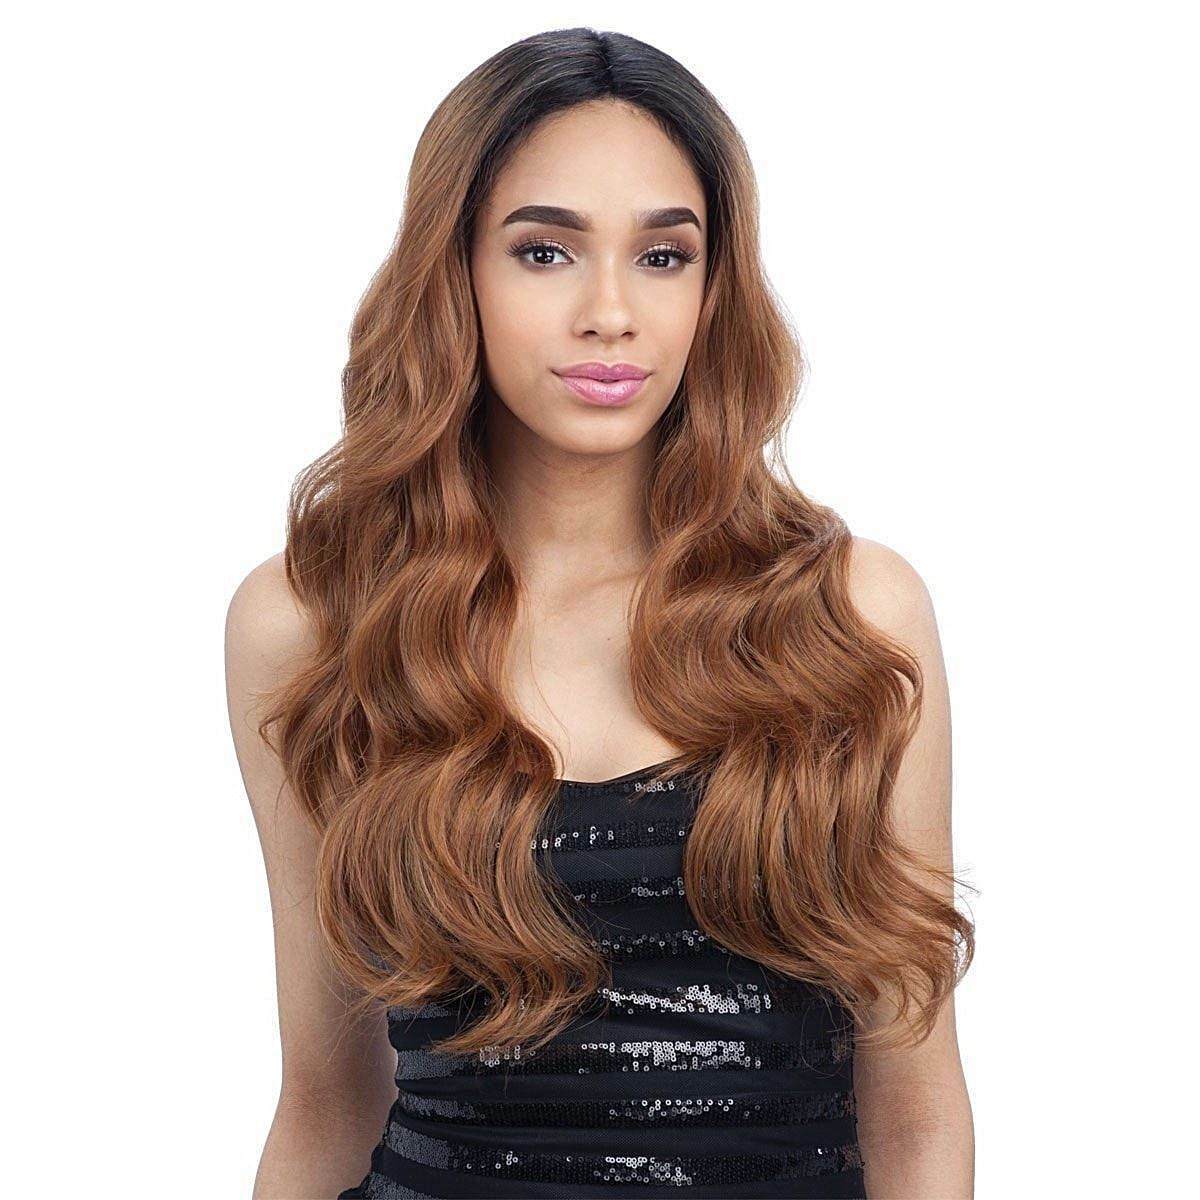 FREETRESS EQUAL SYNTHETIC LACE FRONT LONG CURLY WAVY HAIR WIG - FREEDOM PART 202